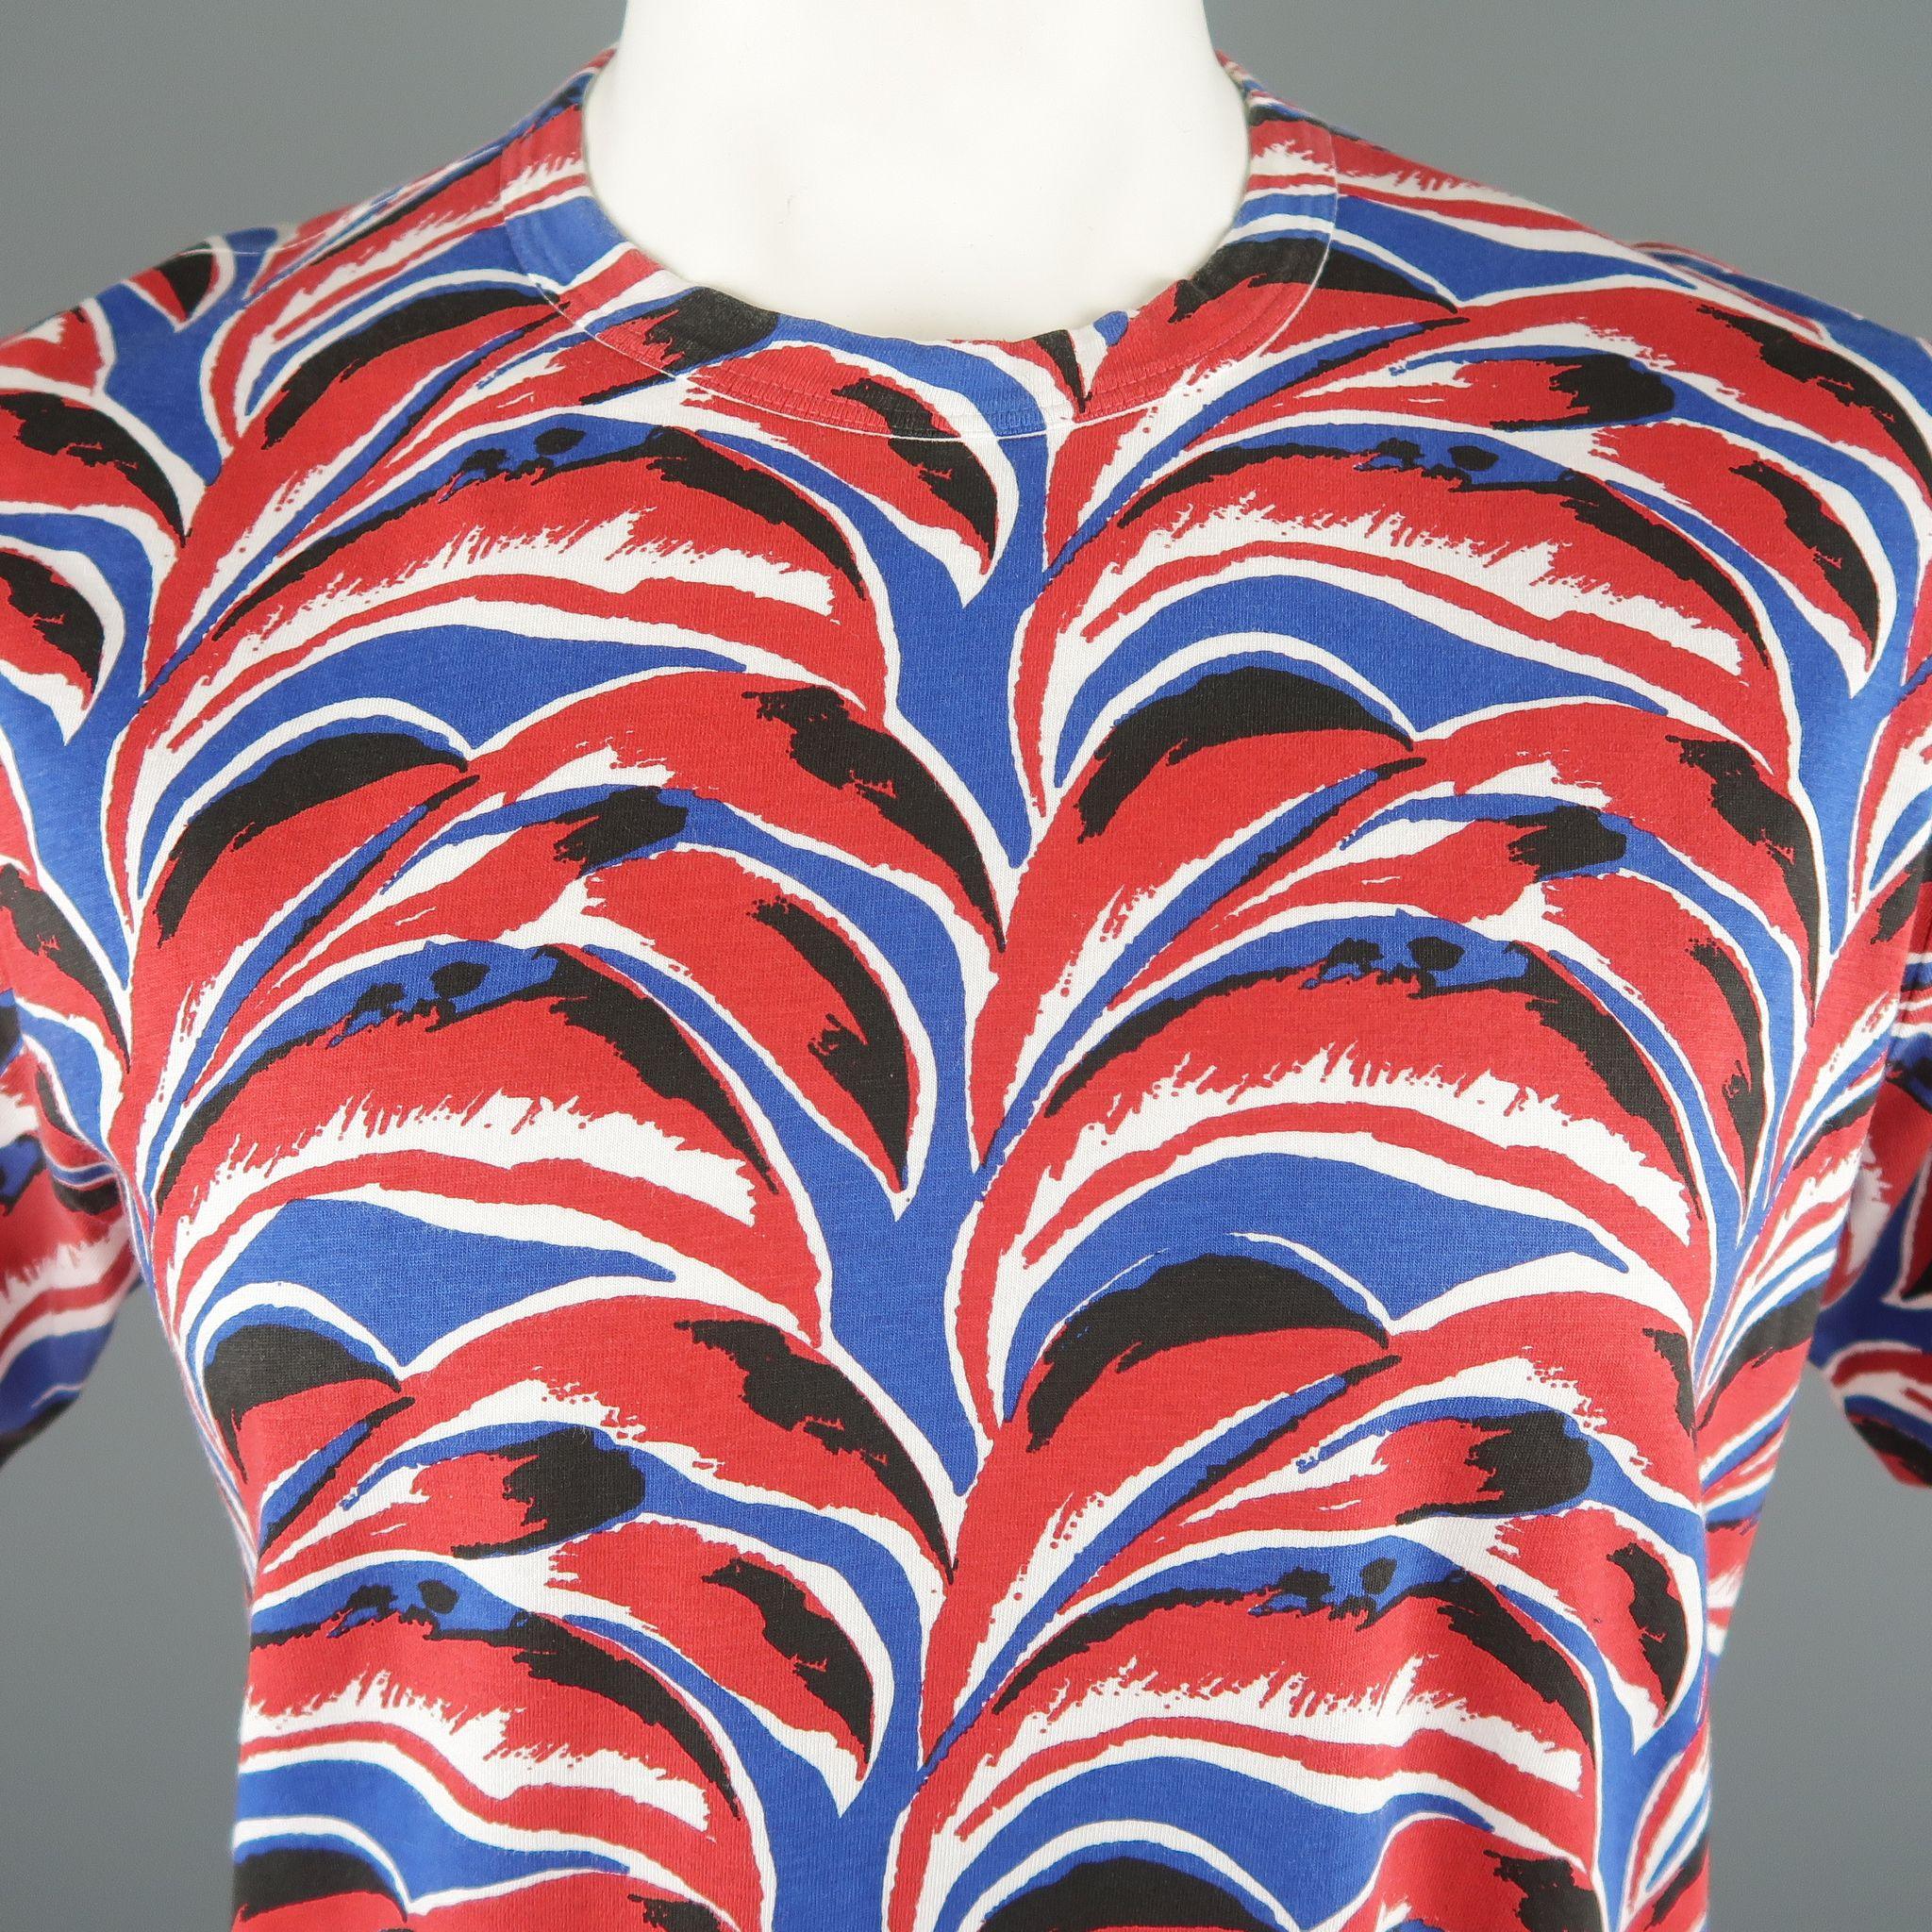 MARNI T-shirt comes in red and blue tones in a printed cotton material, with a crewneck. Made in Italy.
 
Excellent Pre-Owned Condition.
Marked: 52 IT
 
Measurements:
 
Shoulder: 18  in.
Chest: 45  in.
Sleeve: 10  in.
Length: 29.5  in.
SKU: